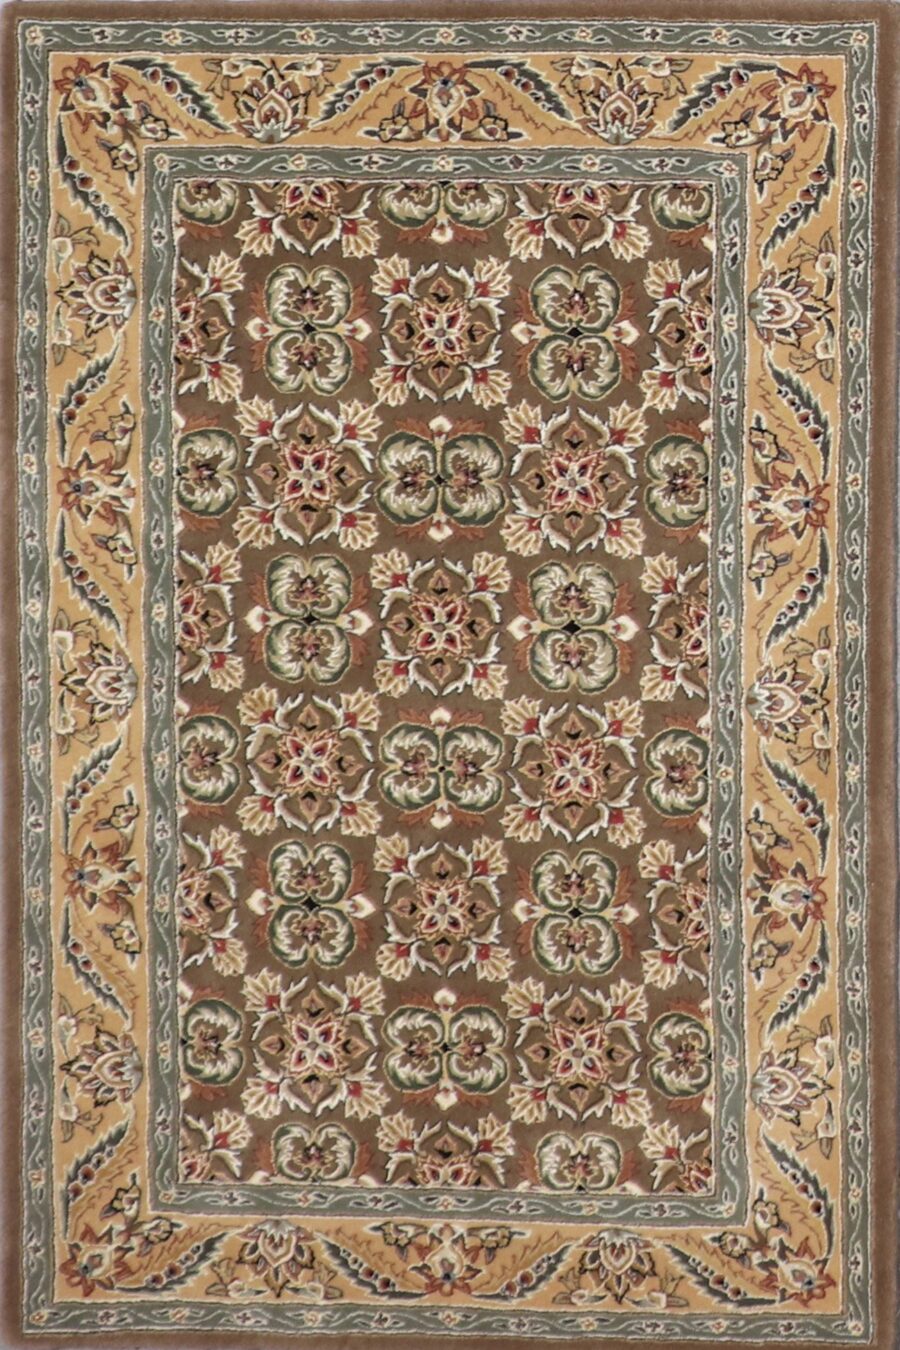 3’8”x5’7” Traditional Brown Wool & Silk Hand-Tufted Rug - Direct Rug Import | Rugs in Chicago, Indiana,South Bend,Granger